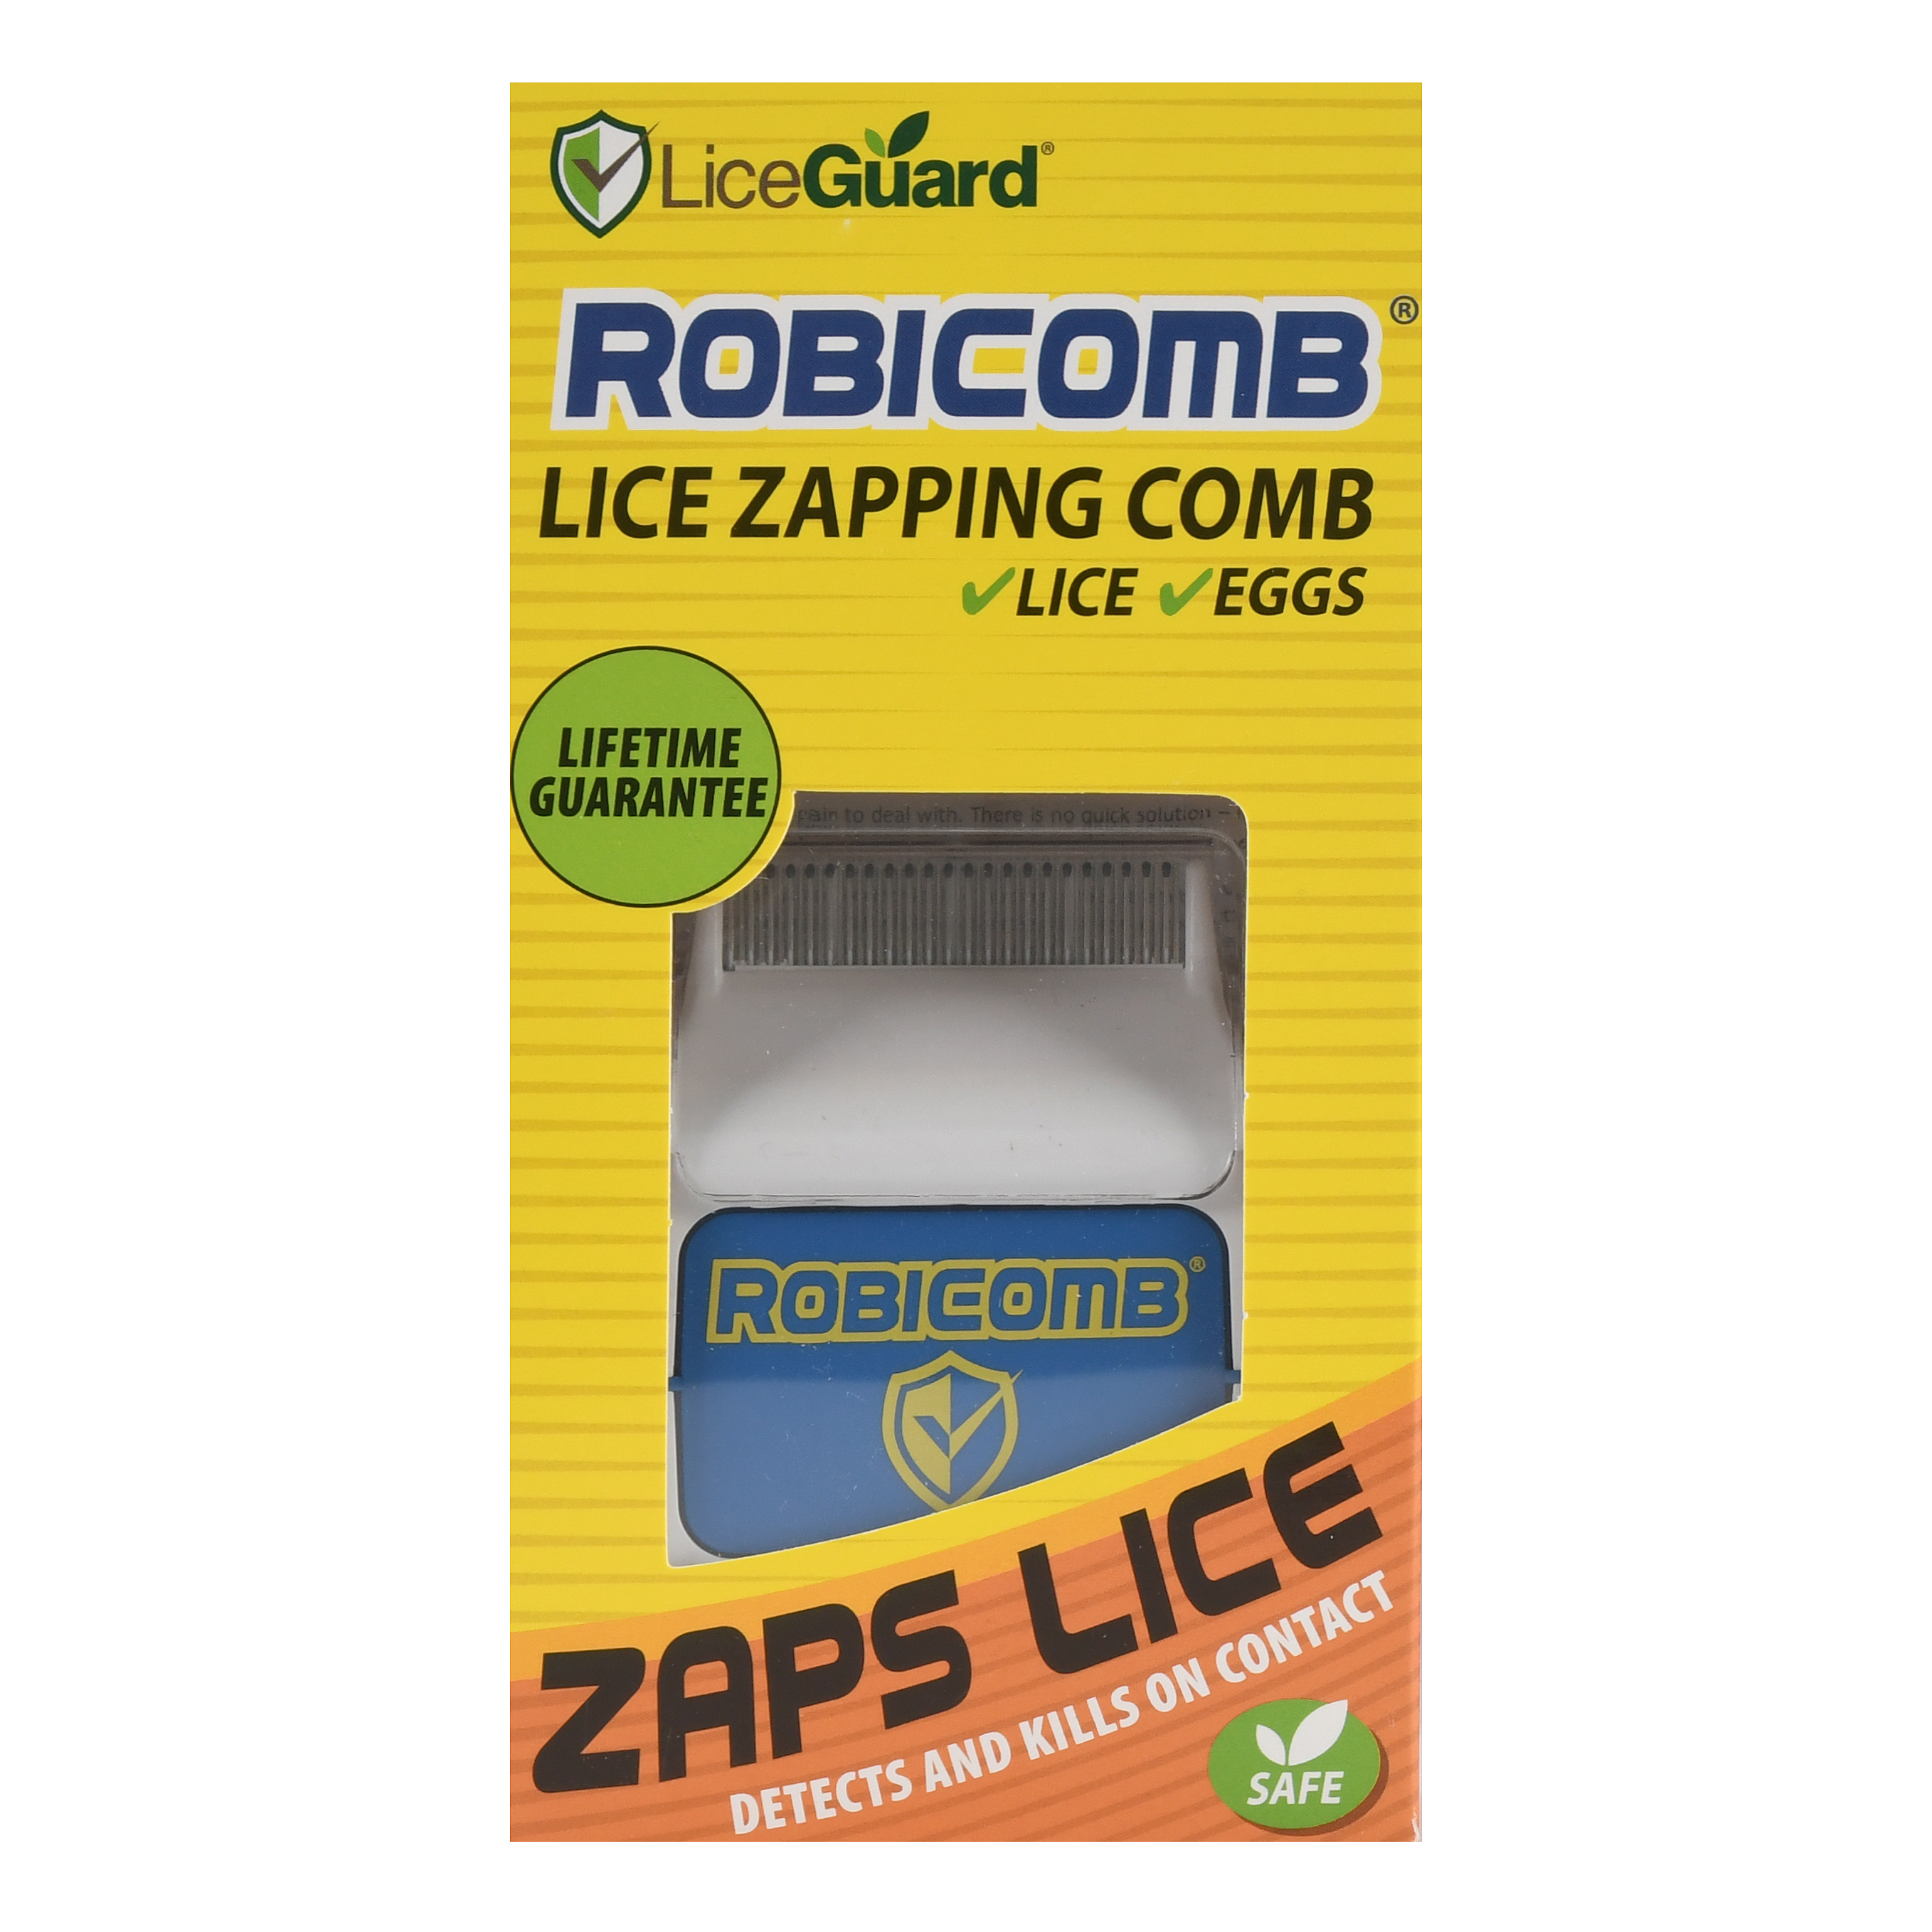 LiceGuard RobiComb Lice Zapping Comb - image 1 of 7